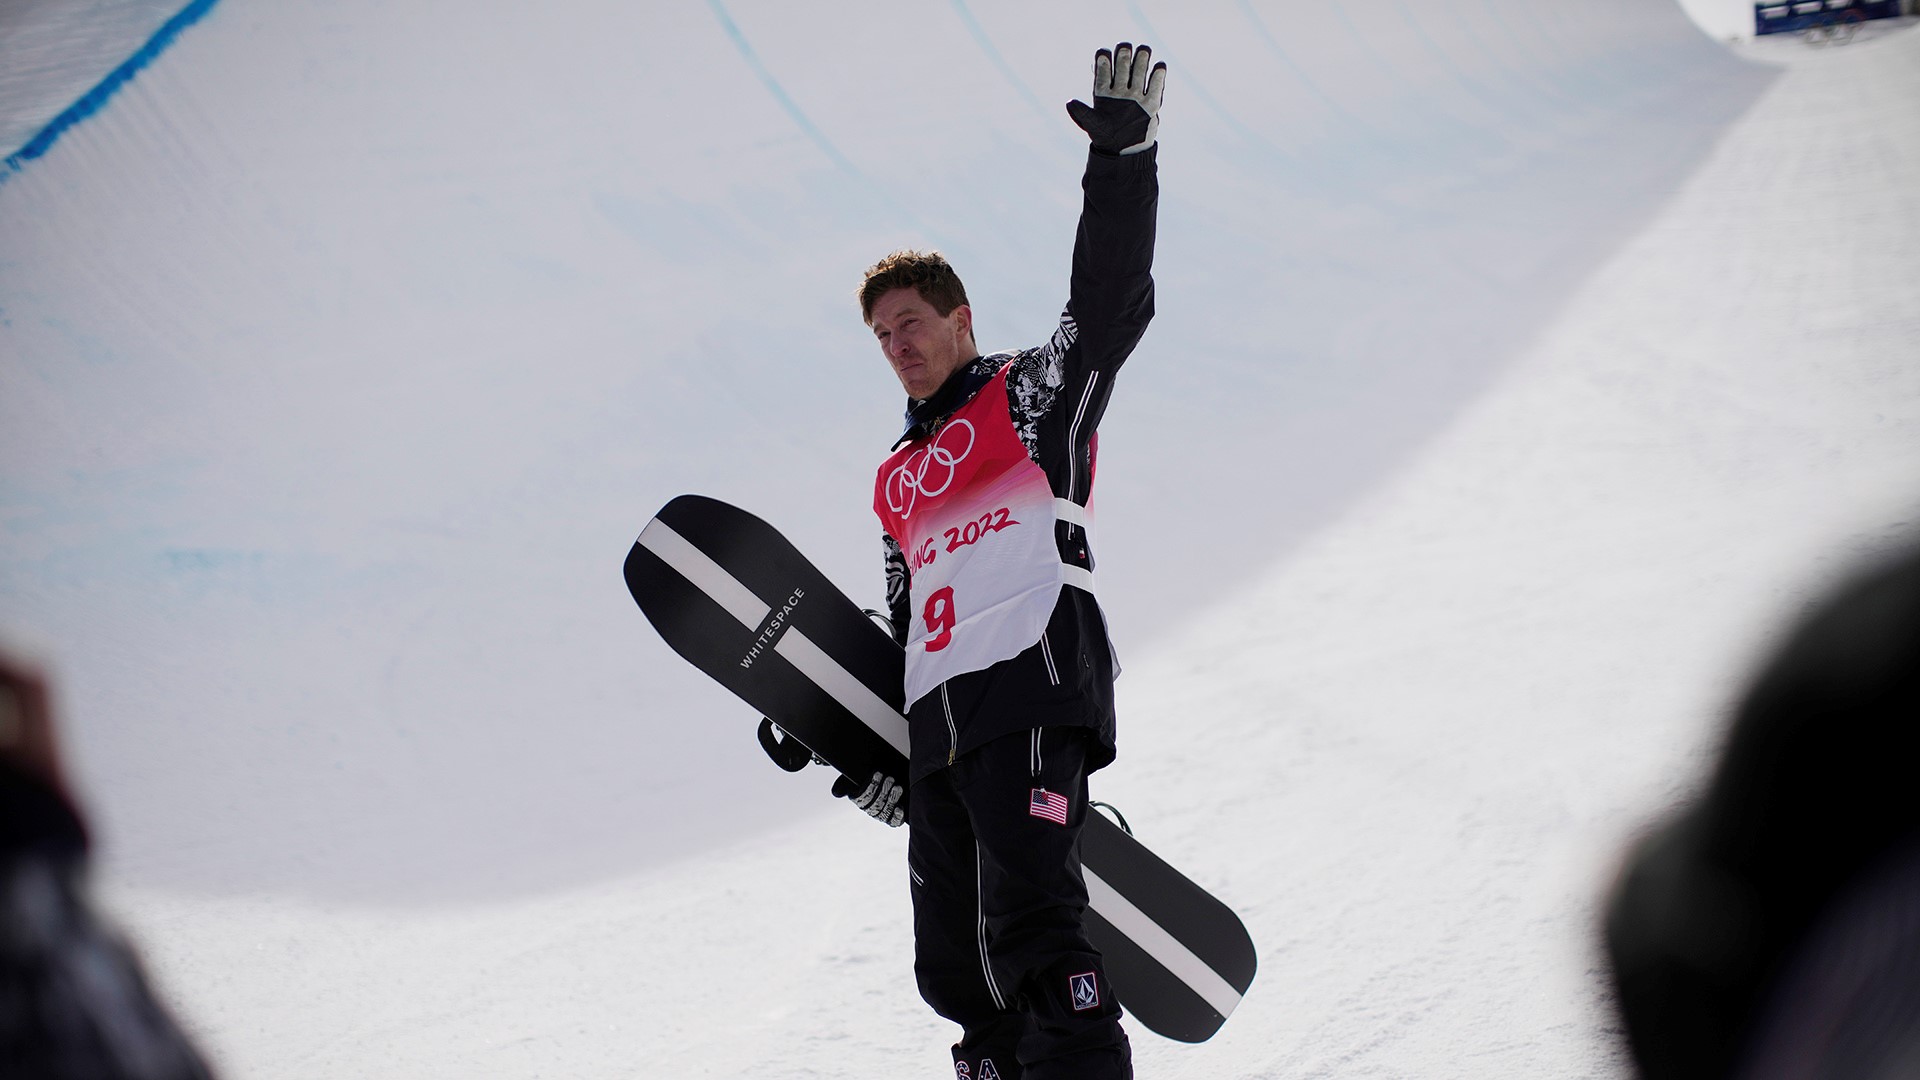 Shaun White took one last run at Olympics glory before heading into retirement. And Mikaela Shiffrin was back on her skis after two early disappointments.